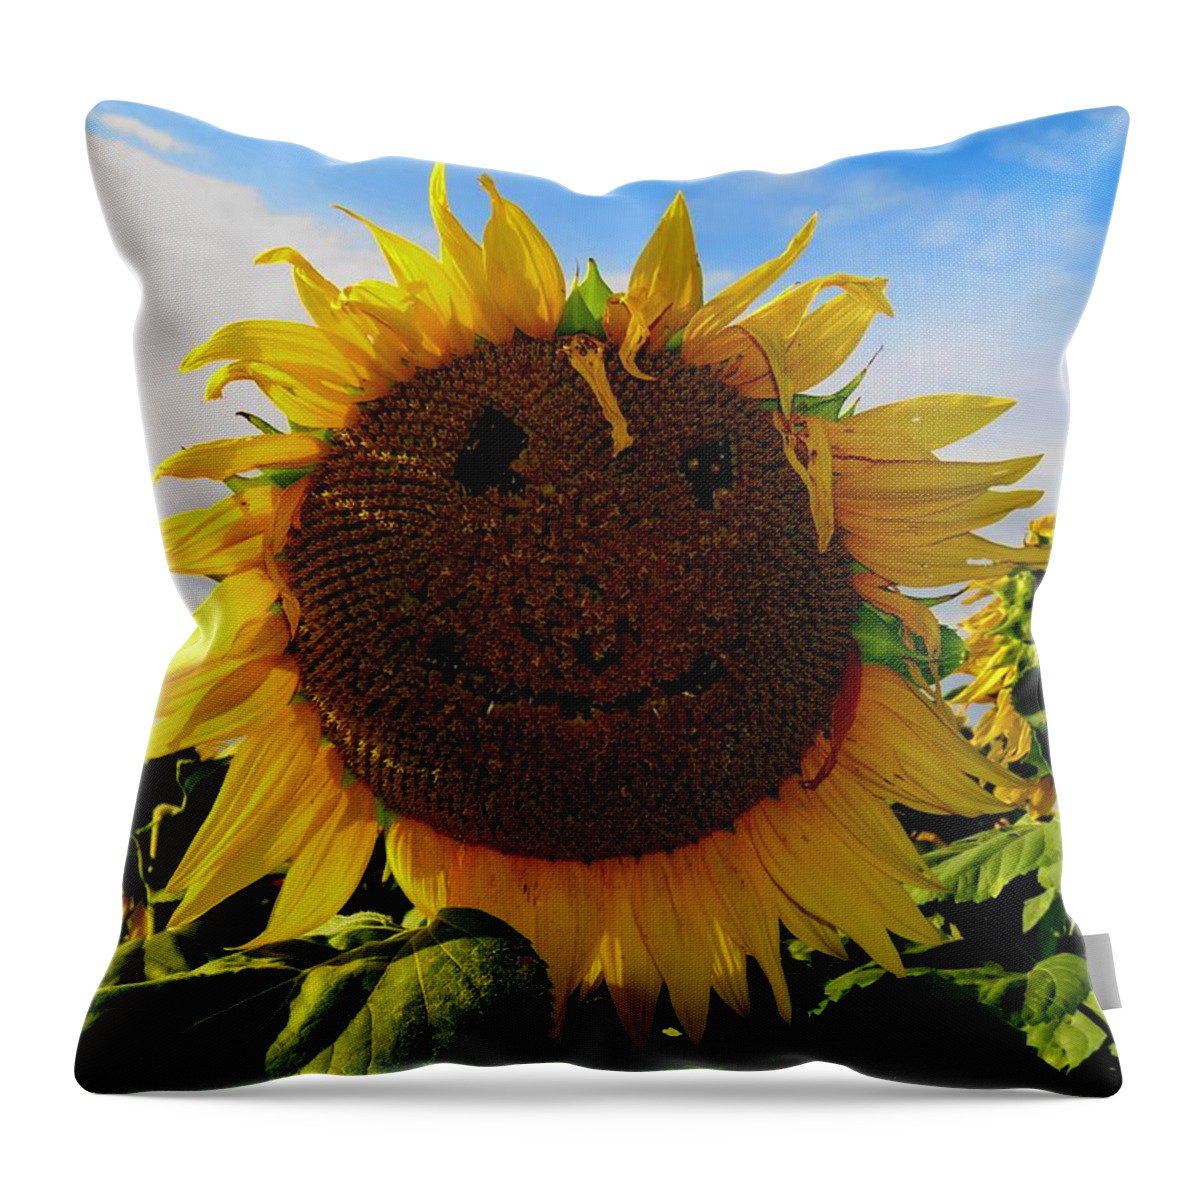 Sunflower Throw Pillow featuring the photograph Kansas Sunflower by Keith Stokes